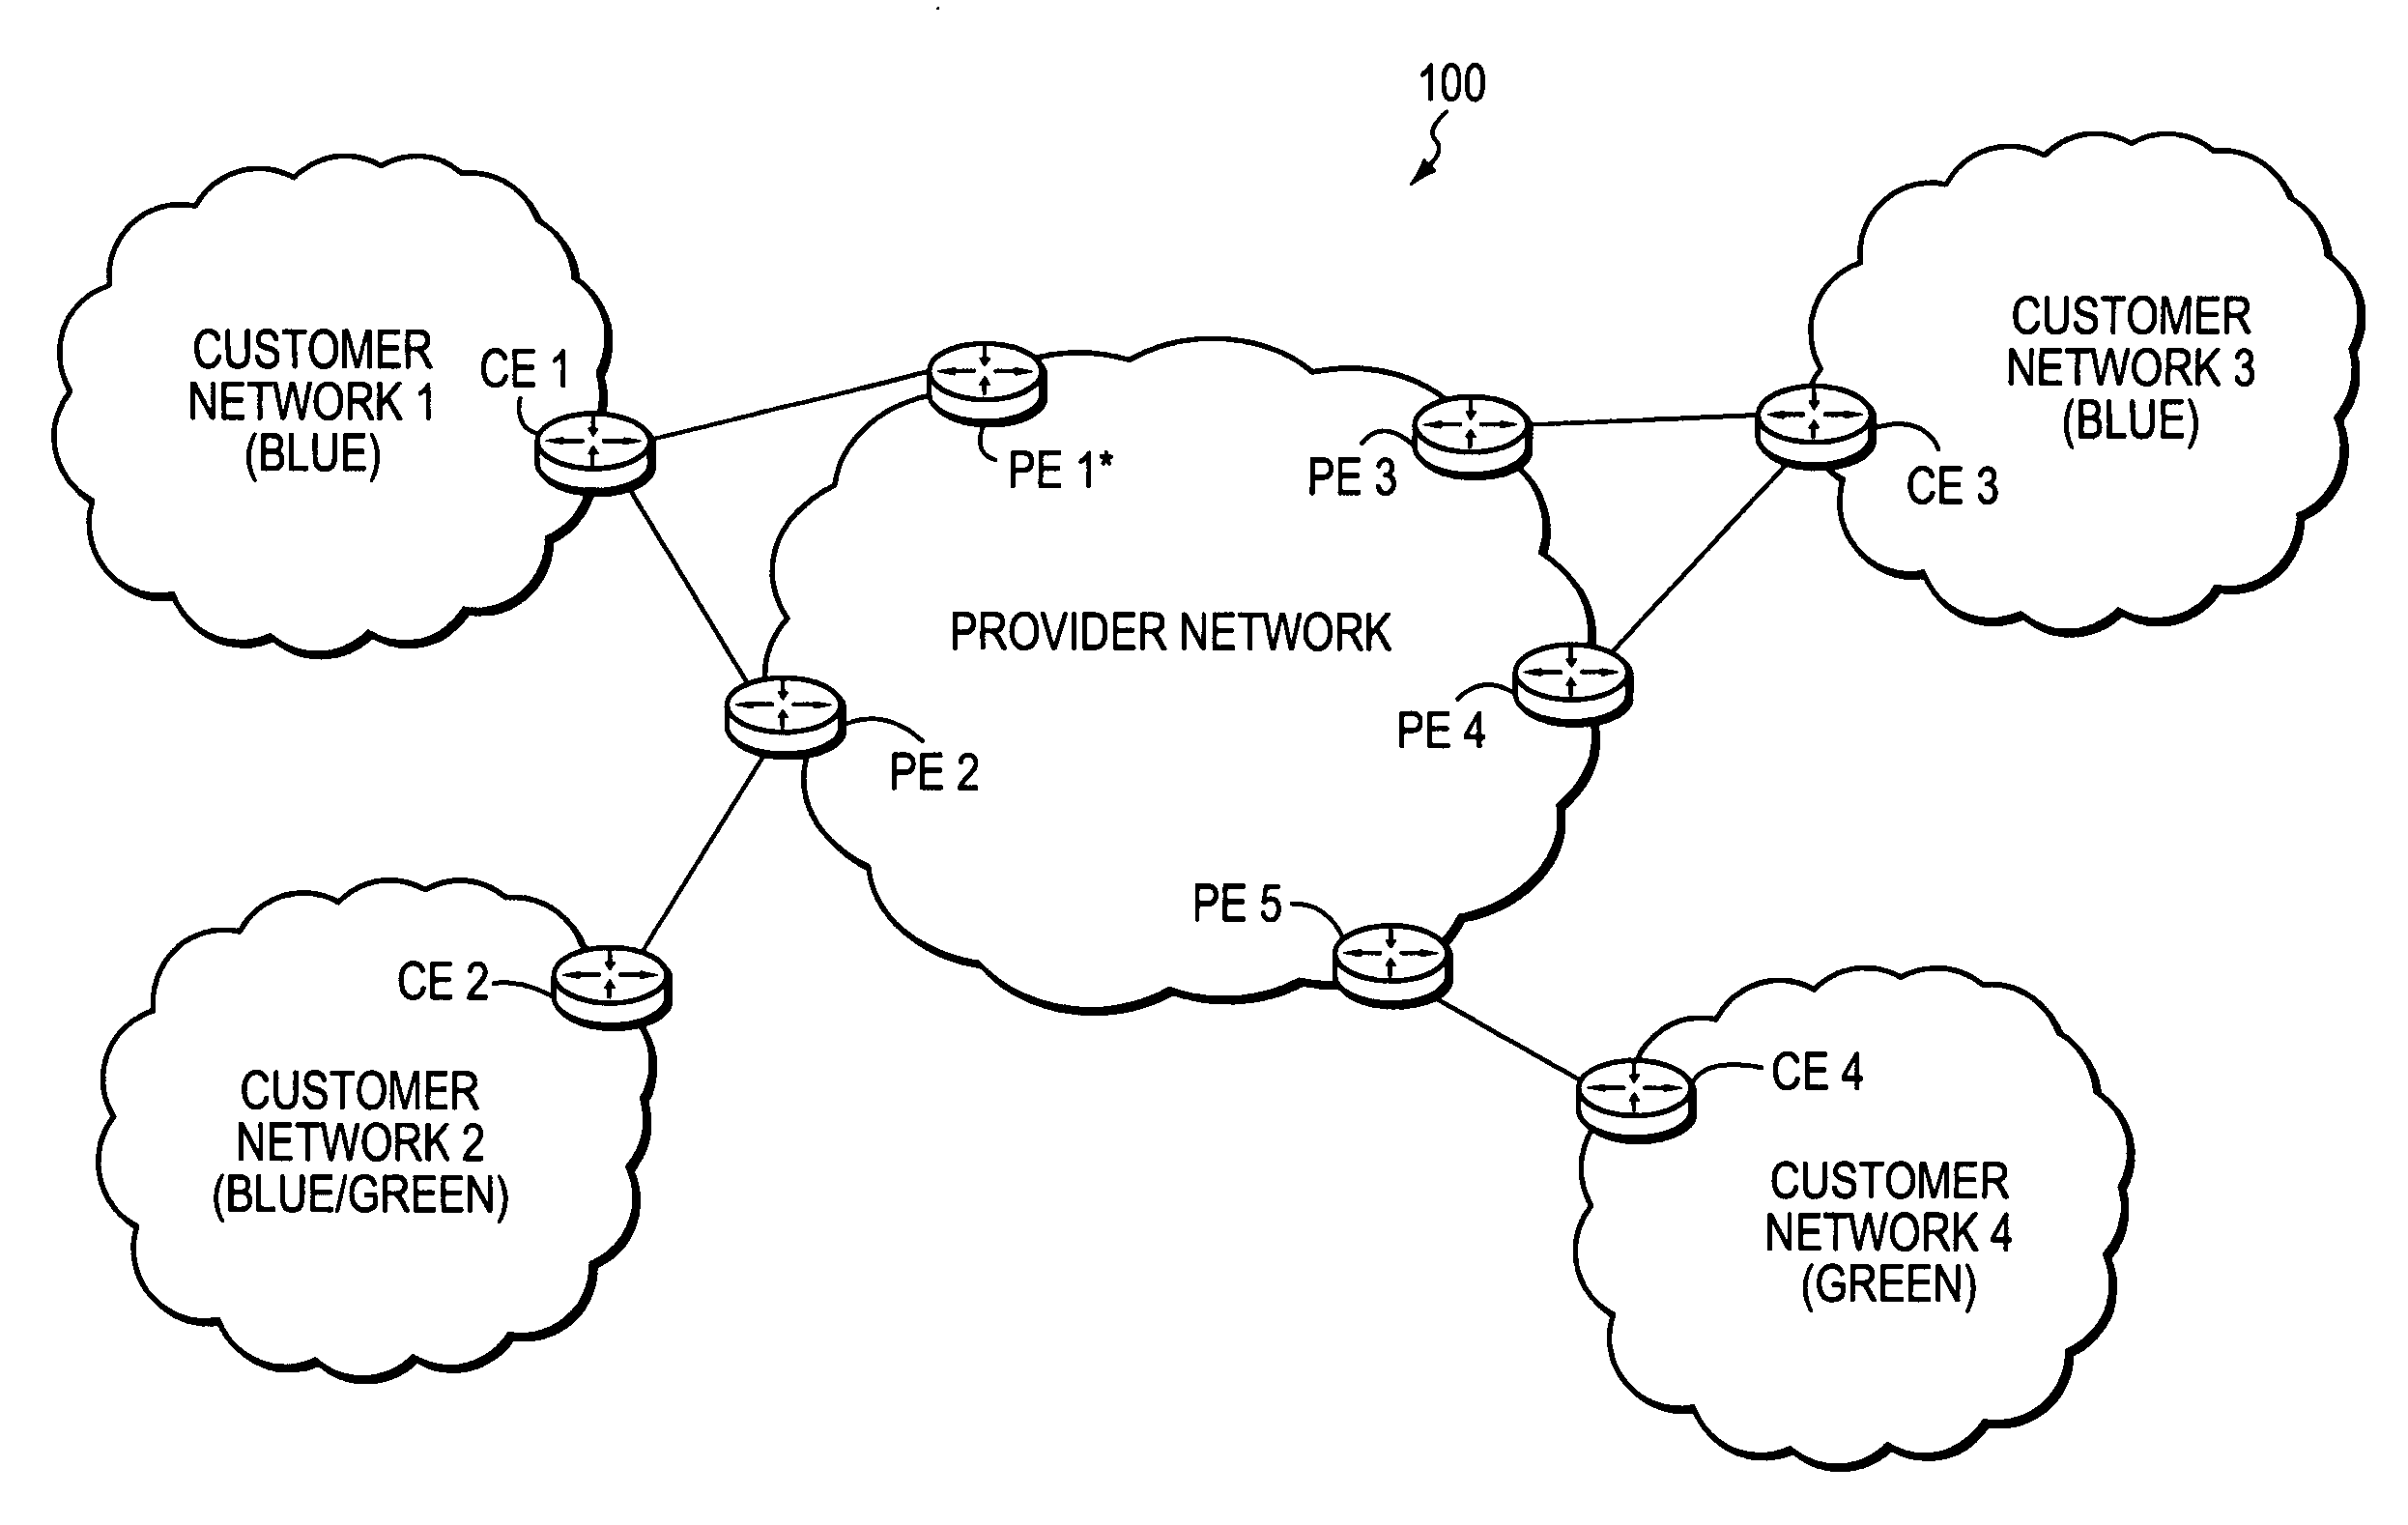 Technique for efficiently routing IP traffic on CE-CE paths across a provider network